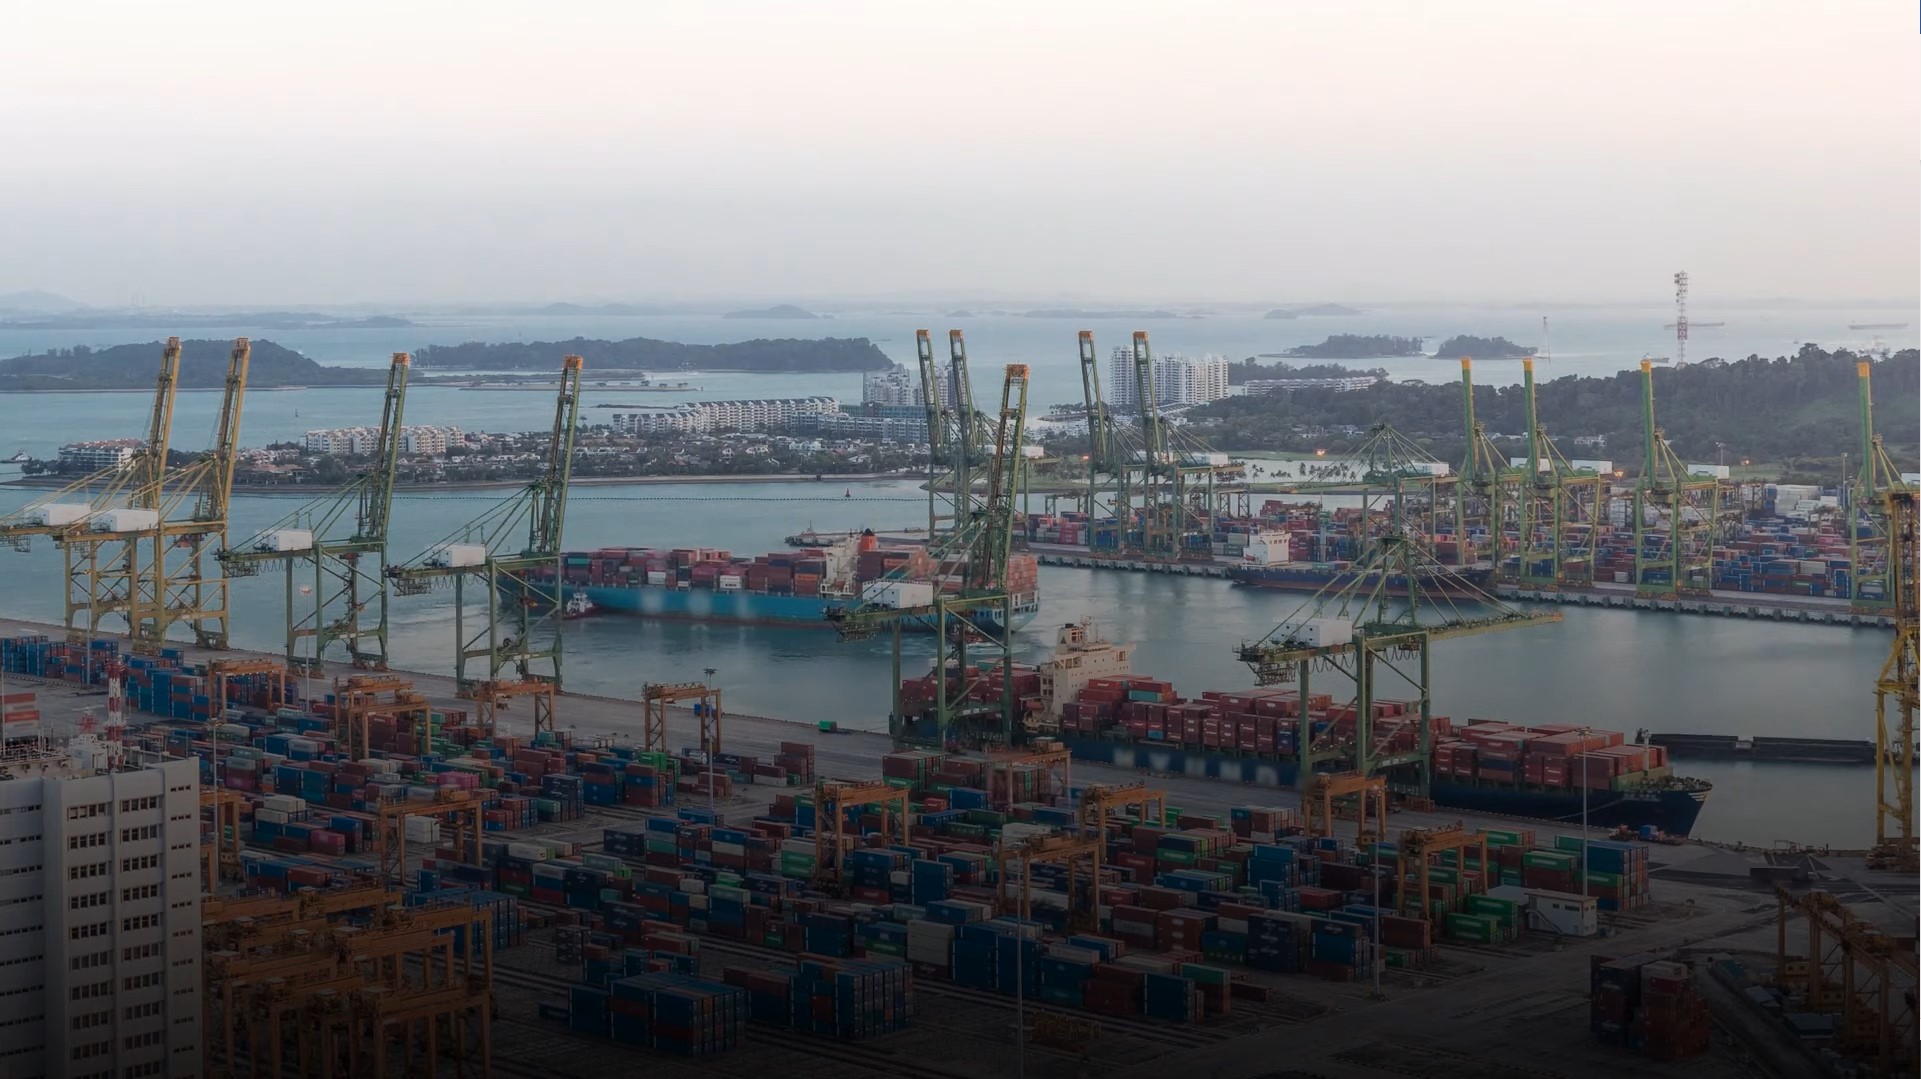 Small but connected: How Singapore stands its ground as a global logistics hub amid Covid-19